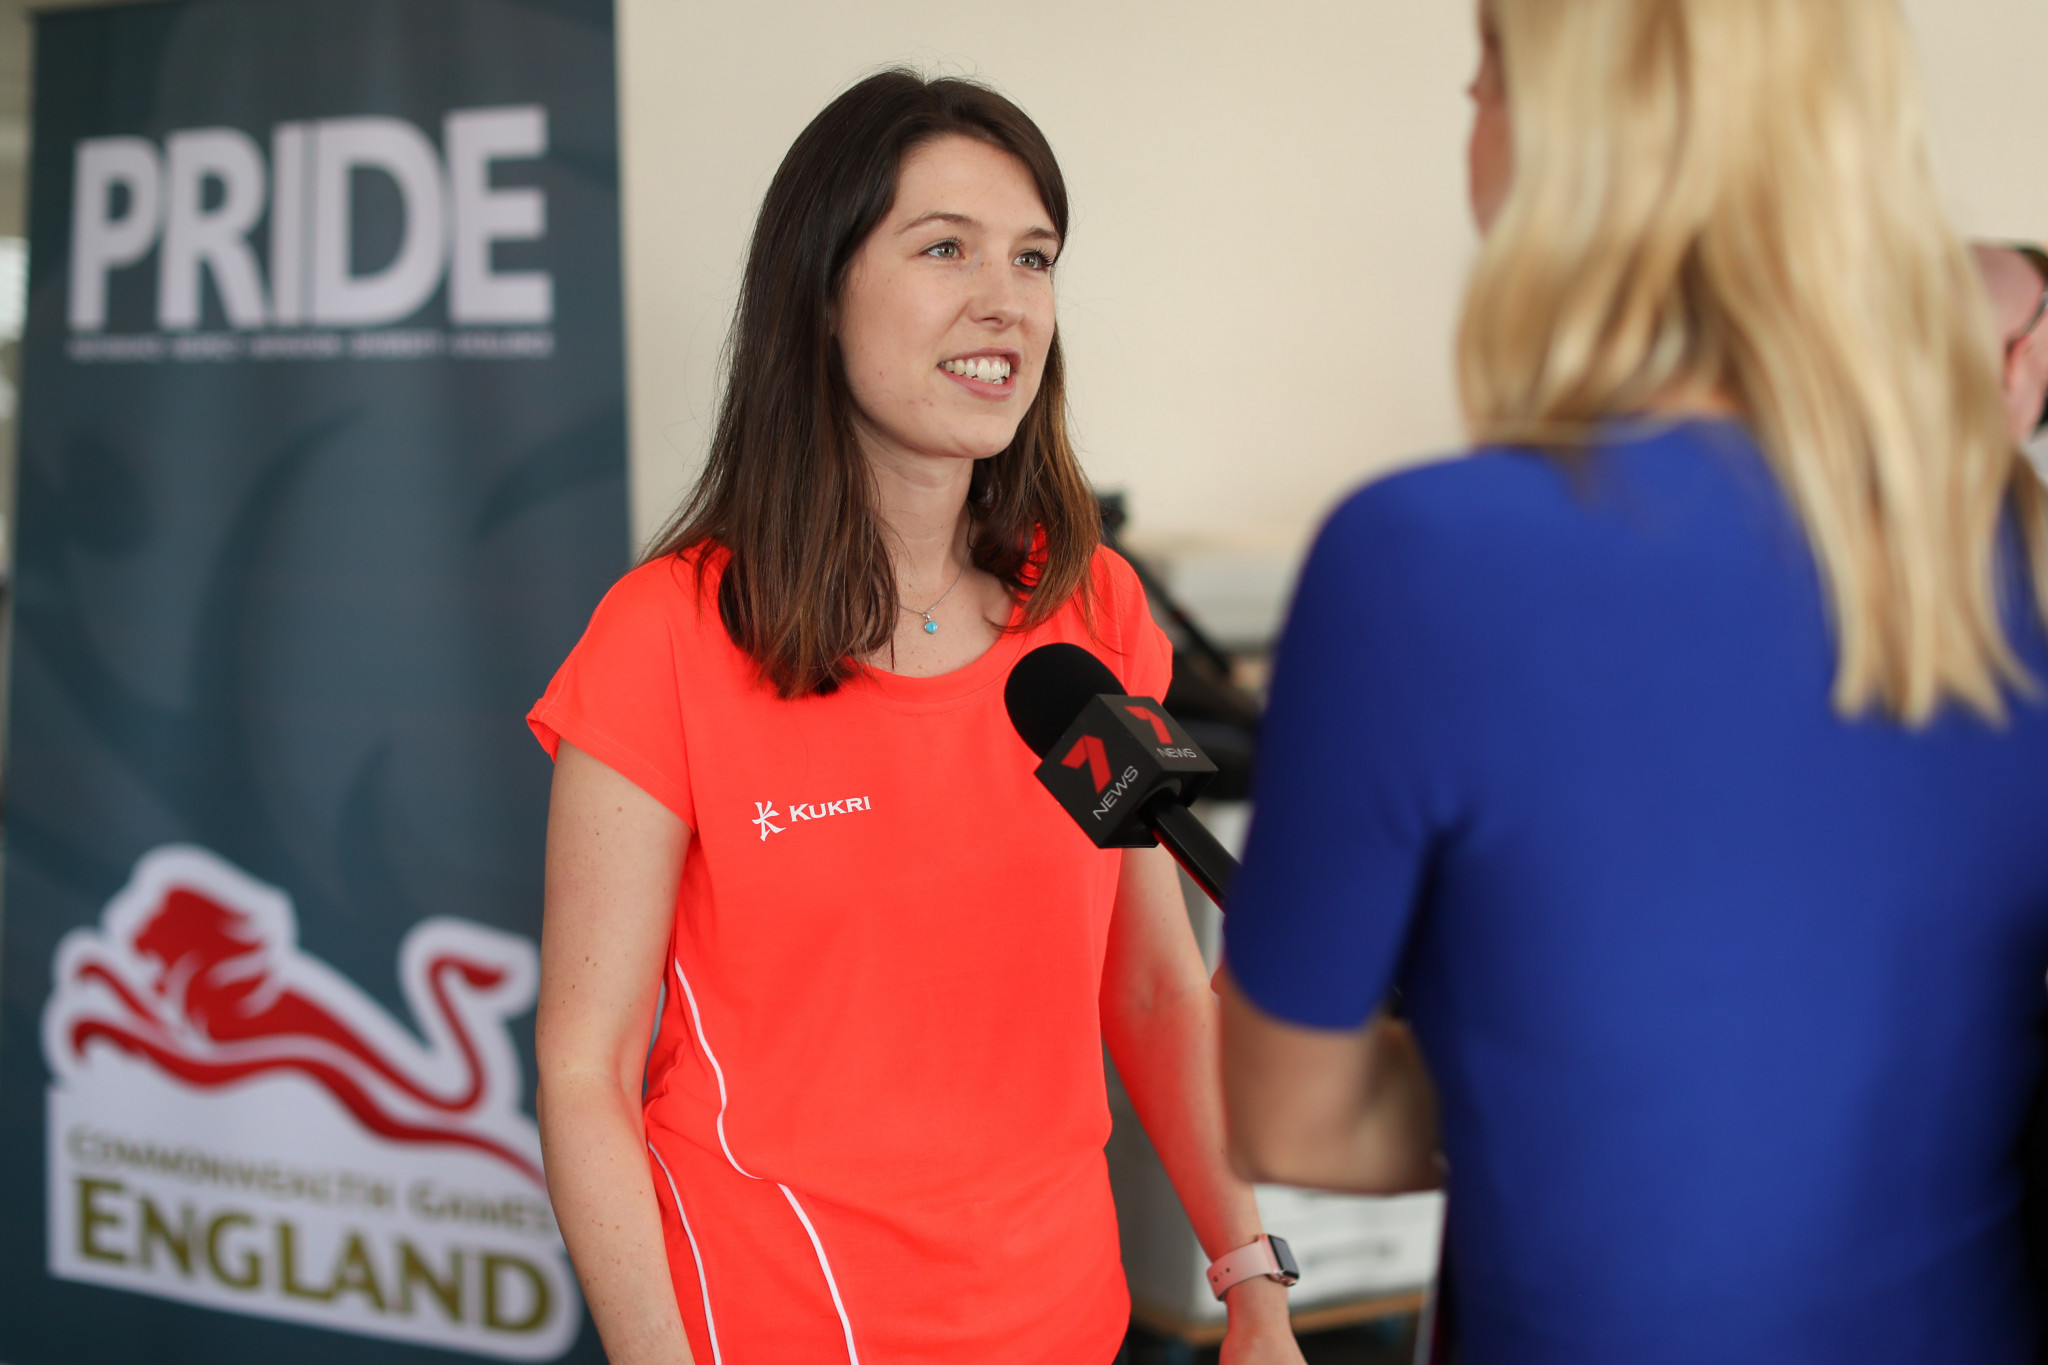 Francesca Carter-Kelly has been appointed as Team England's Chef de Mission for the 2021 Commonwealth Youth Games in Trinidad and Tobago ©Team England 